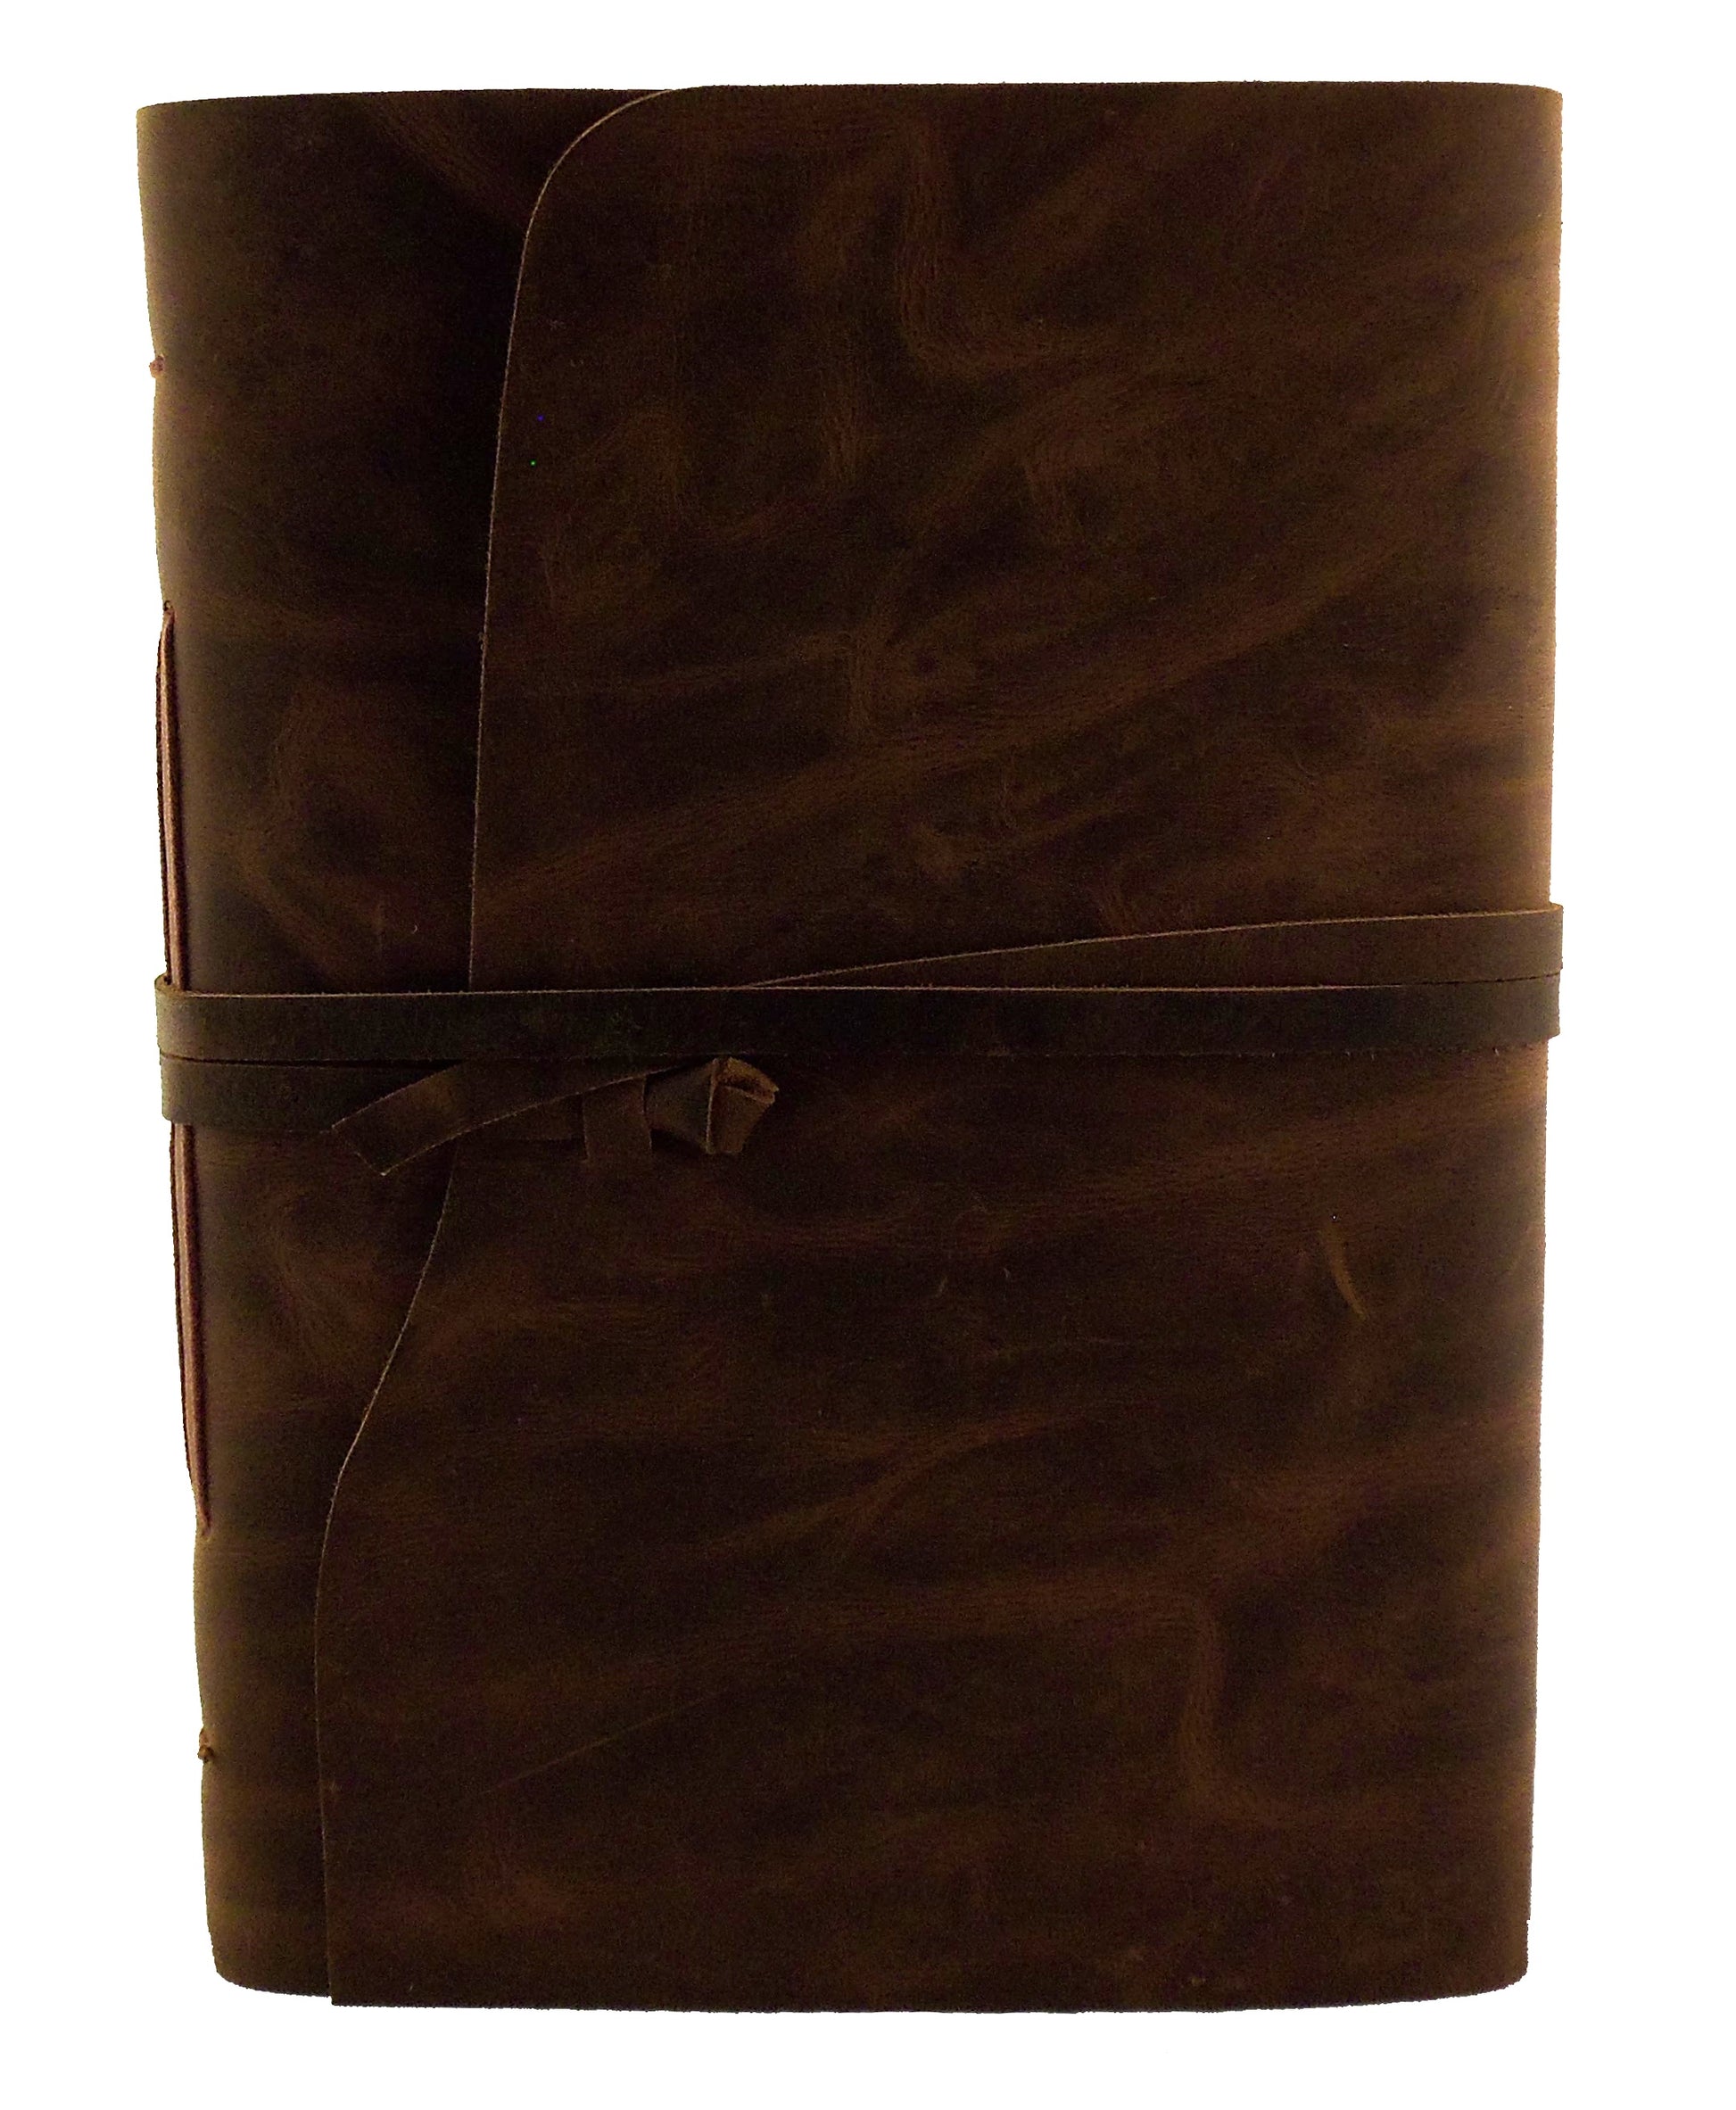 Large Genuine Leather Journal/Sketchbook with Gift Box - 380 Pages - 9" x 12" - Rustic Vintage Style - Rustic Ridge Leather